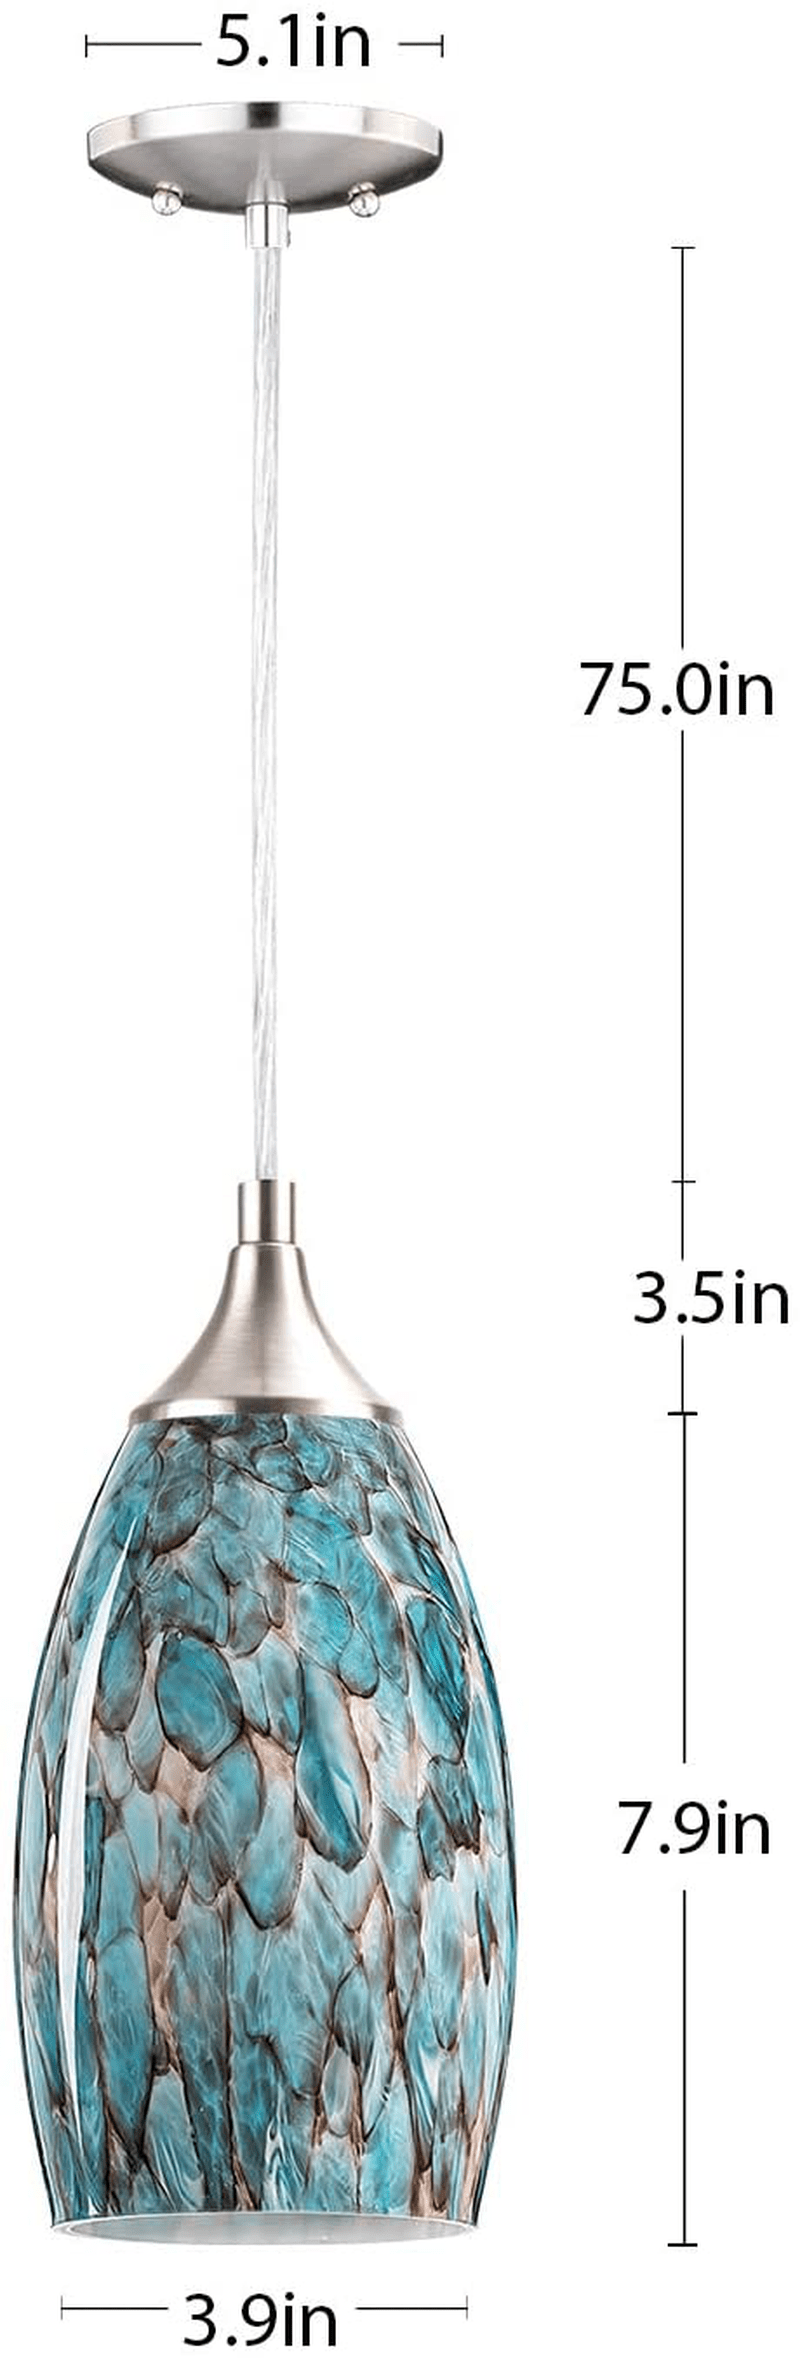 1-Light Pendant Light, Handcrafted Art Glass Hanging Light with Brushed Nickel Finished Adjustable Cord for Kitchen Island (Blue)